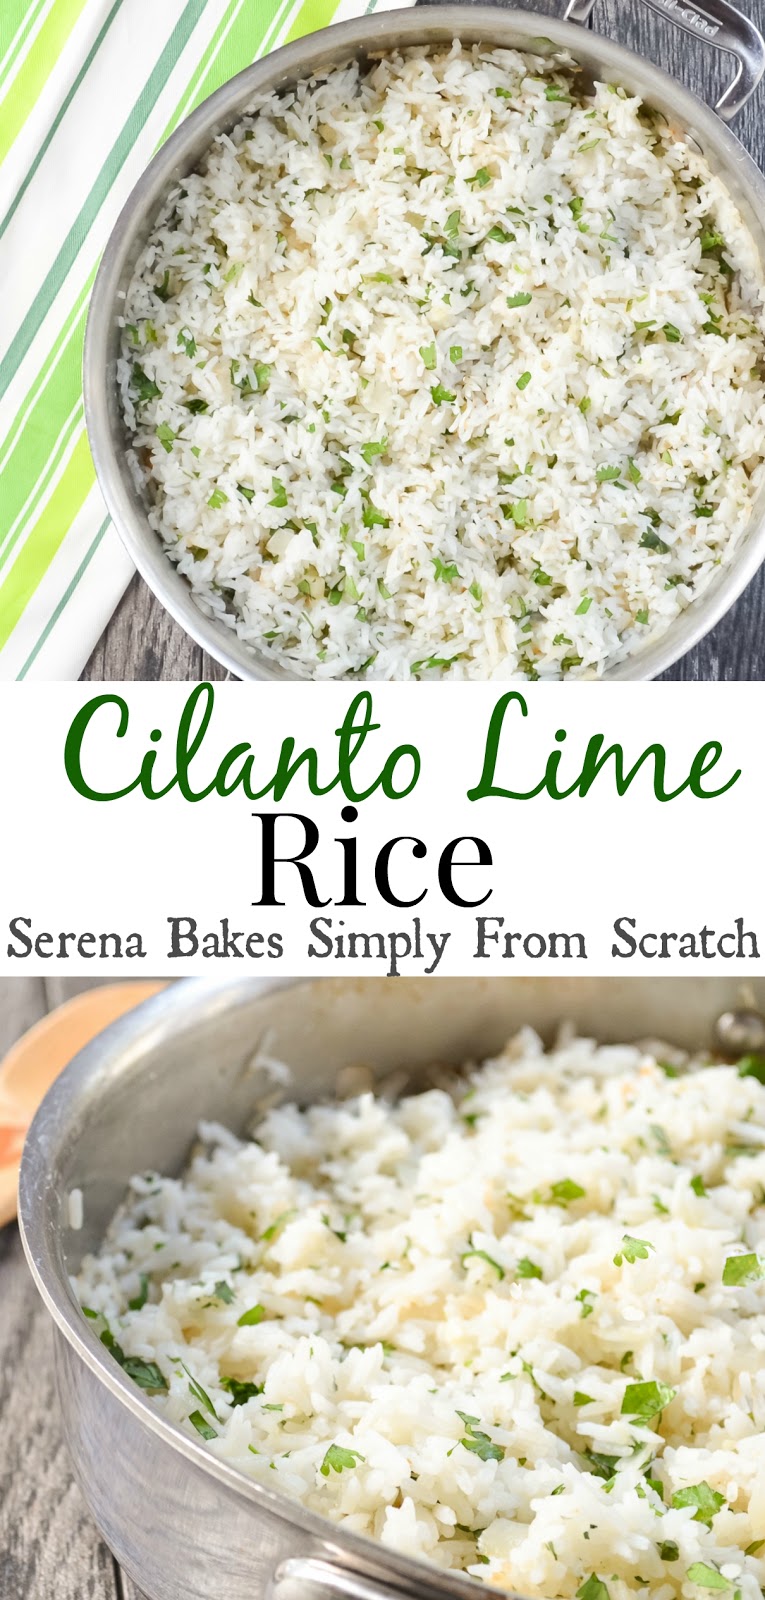 Cilantro Lime Rice | Serena Bakes Simply From Scratch